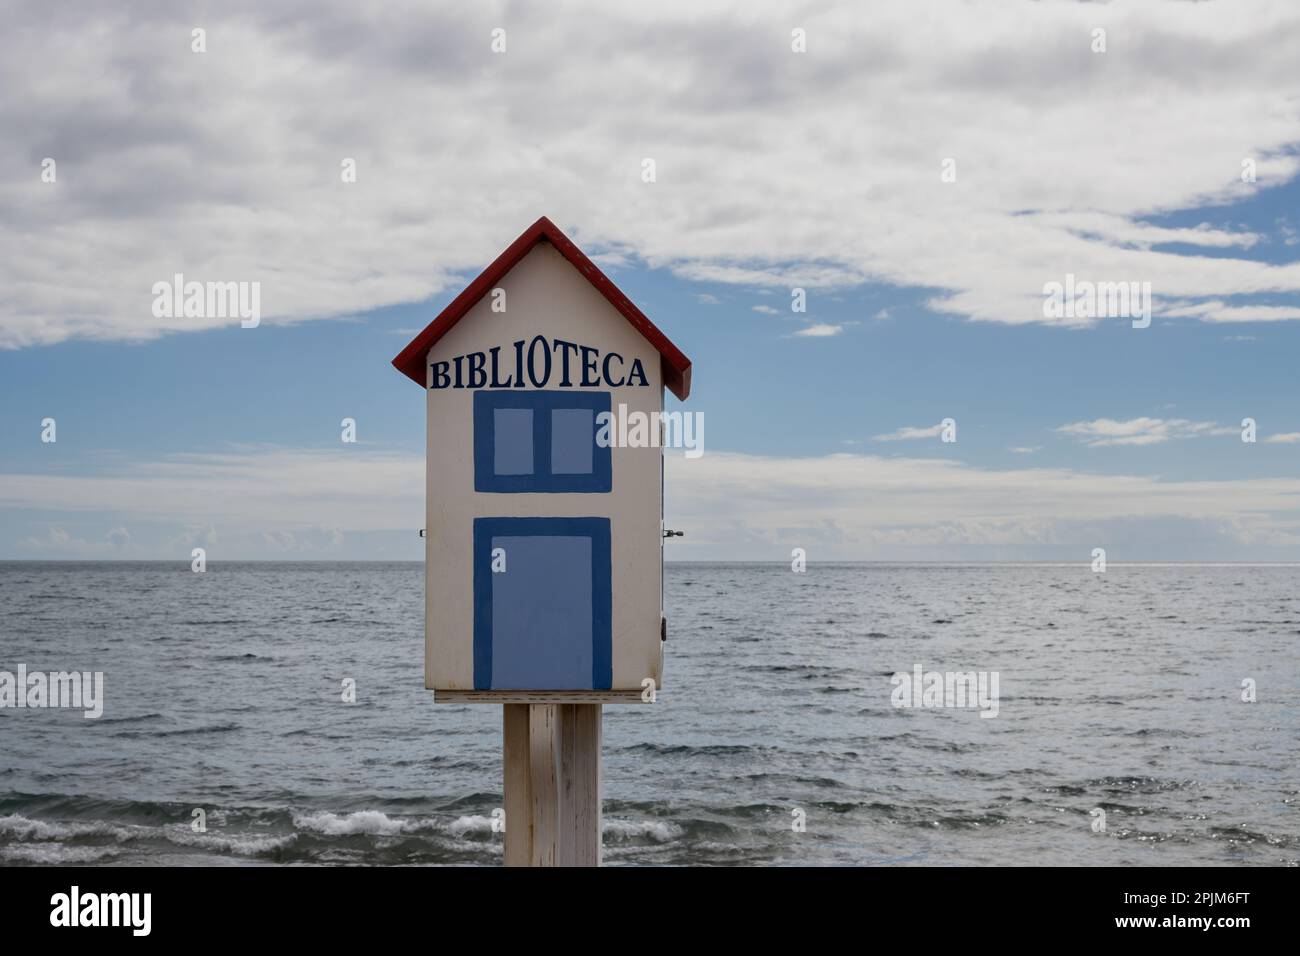 Little wooden house with title Biblioteca, built on the promenade of Atlantic ocean, to share the books. Blue sky with white clouds. Tarajalejo, Fuert Stock Photo